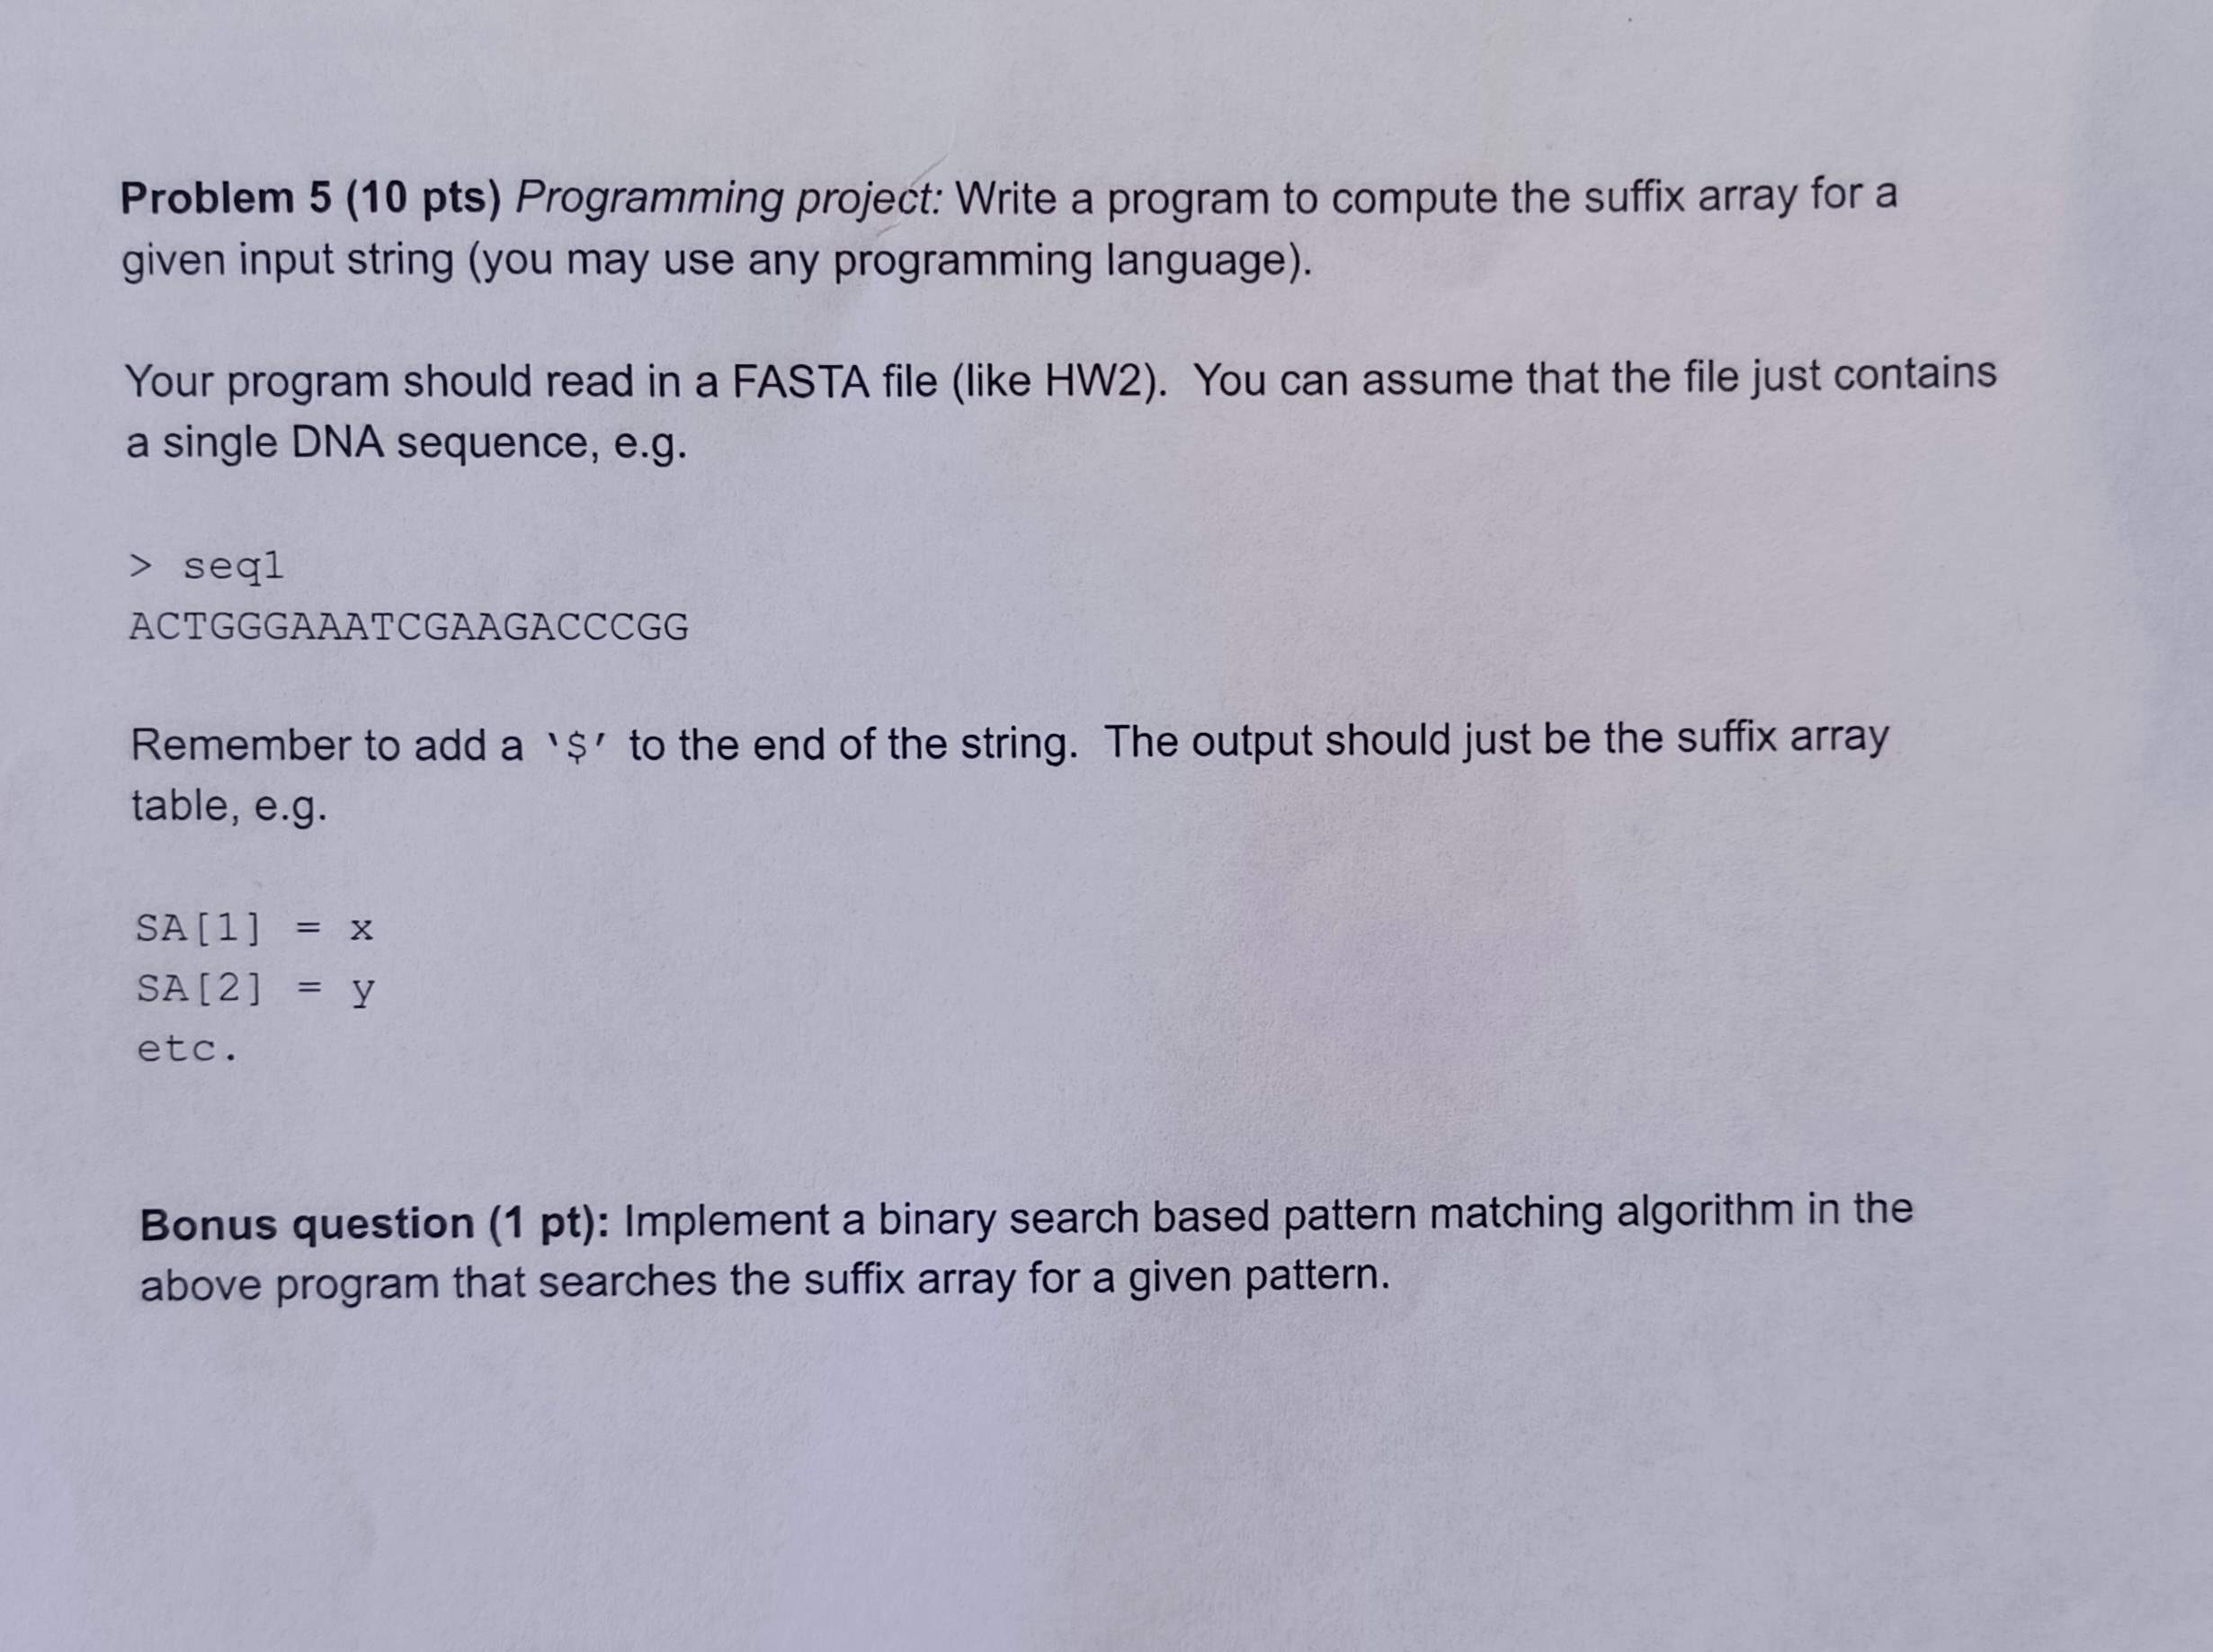 Problem 5 (10 pts) Programming project: Write a program to compute the suffix array for a given input string